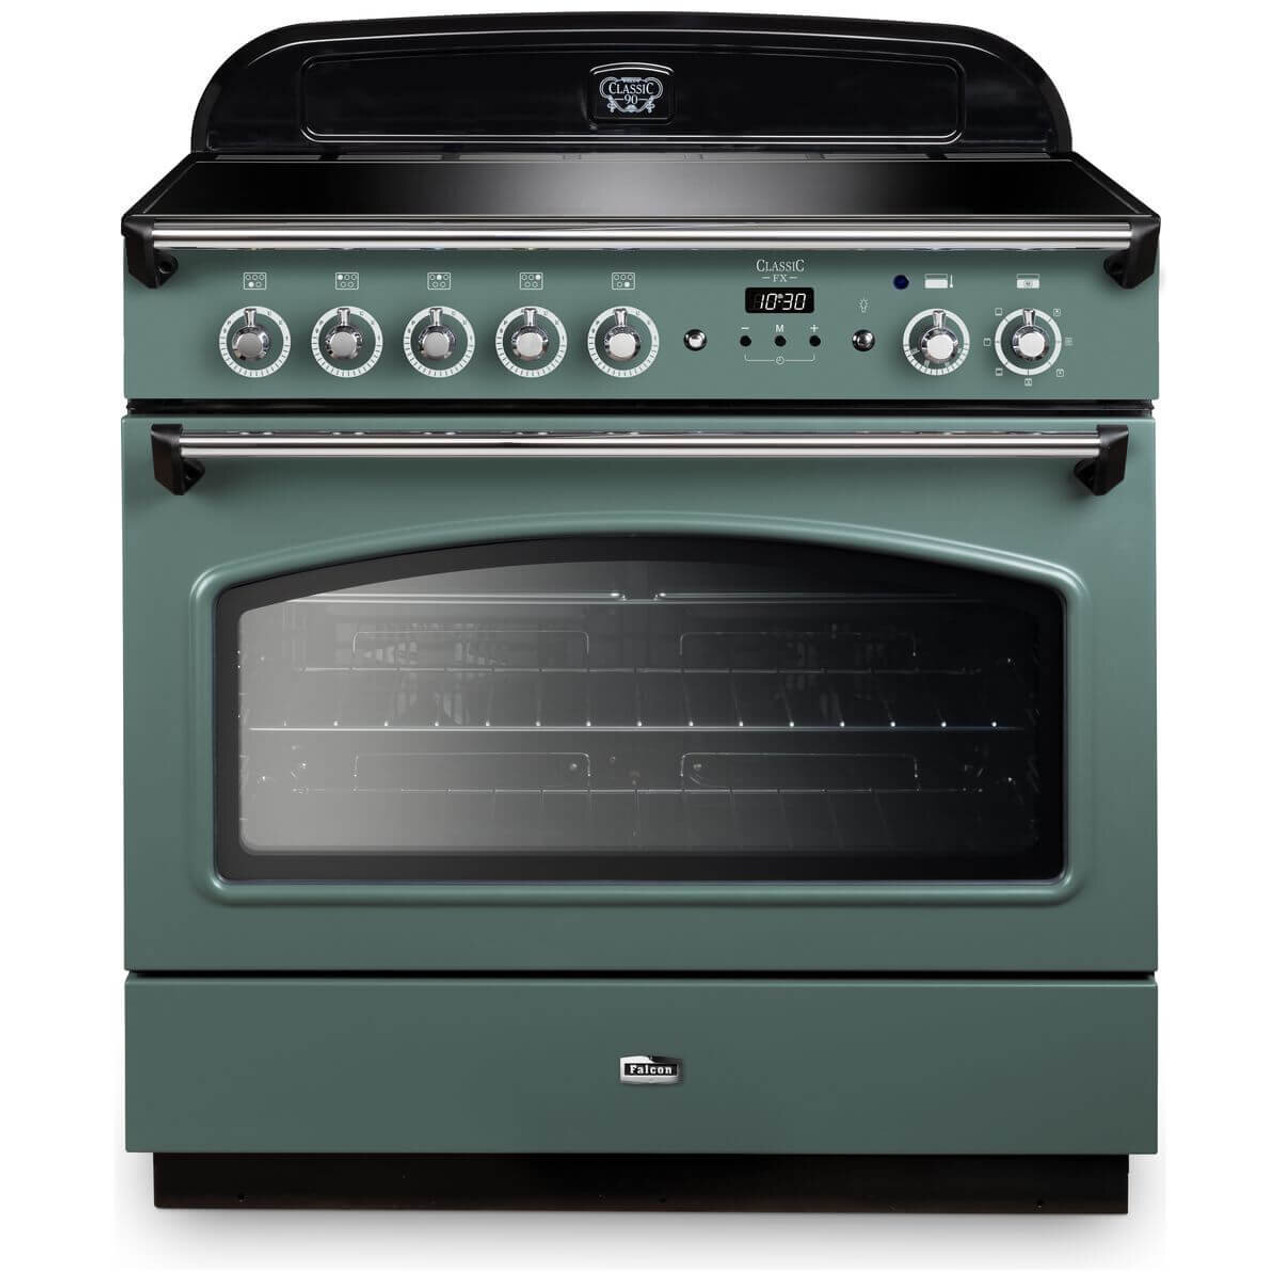 CLA90FXEIMGCH - Classic FX 90cm Induction Freestanding Oven/Stove - Mineral Green 